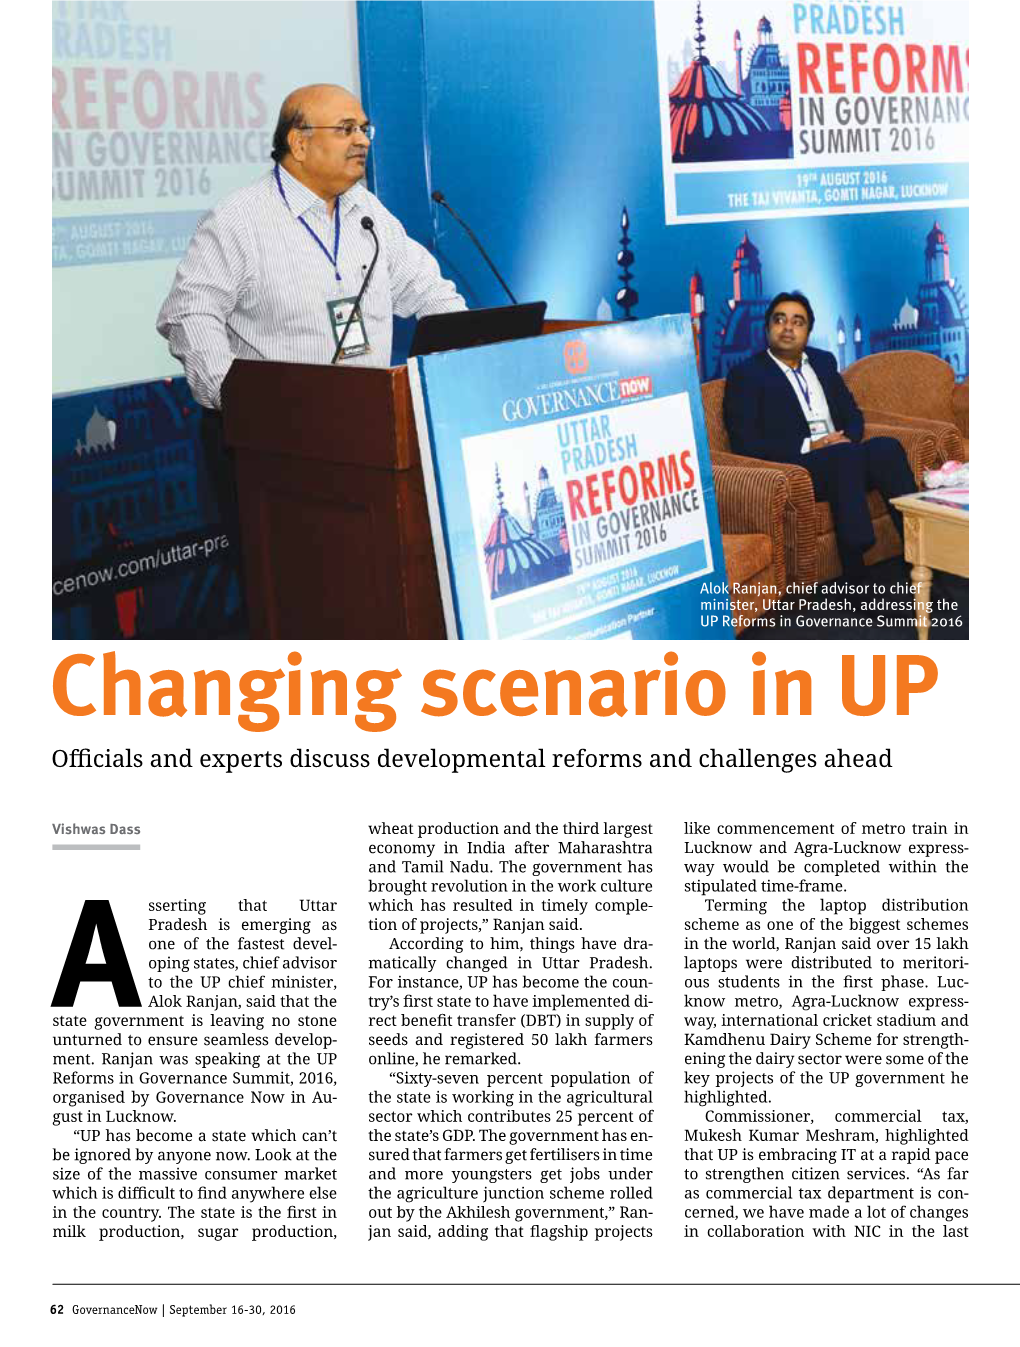 Changing Scenario in up Officials and Experts Discuss Developmental Reforms and Challenges Ahead